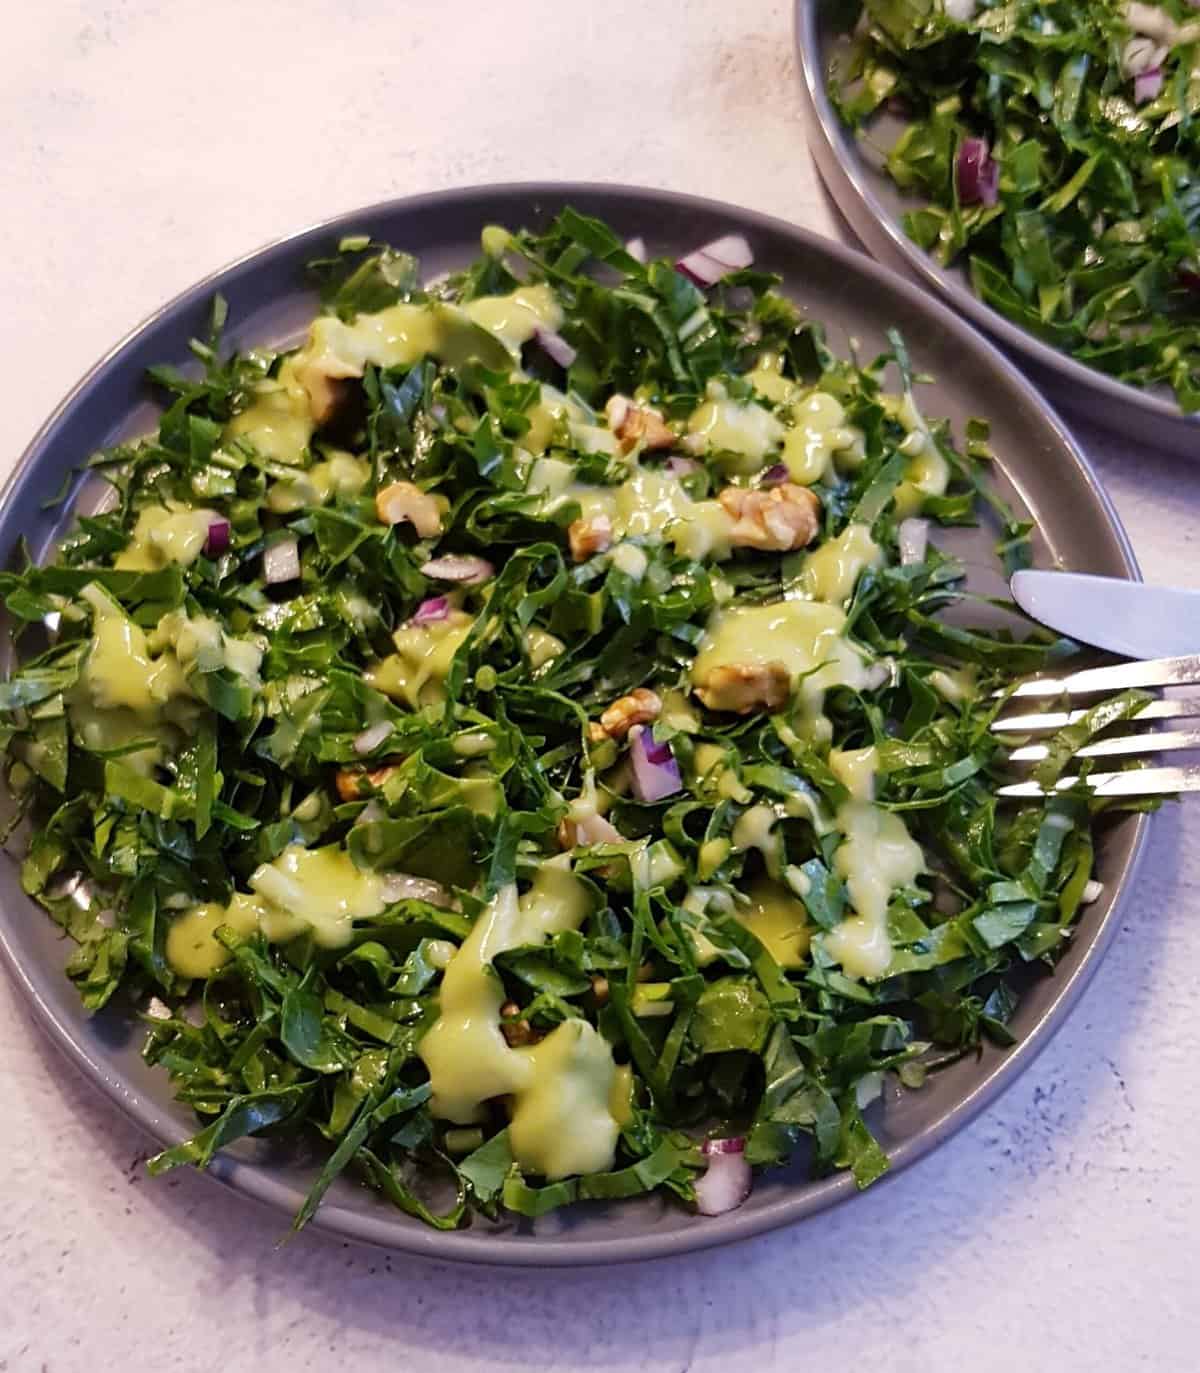 Overhead view of a plate full of kale salad with avocado dressing on top.